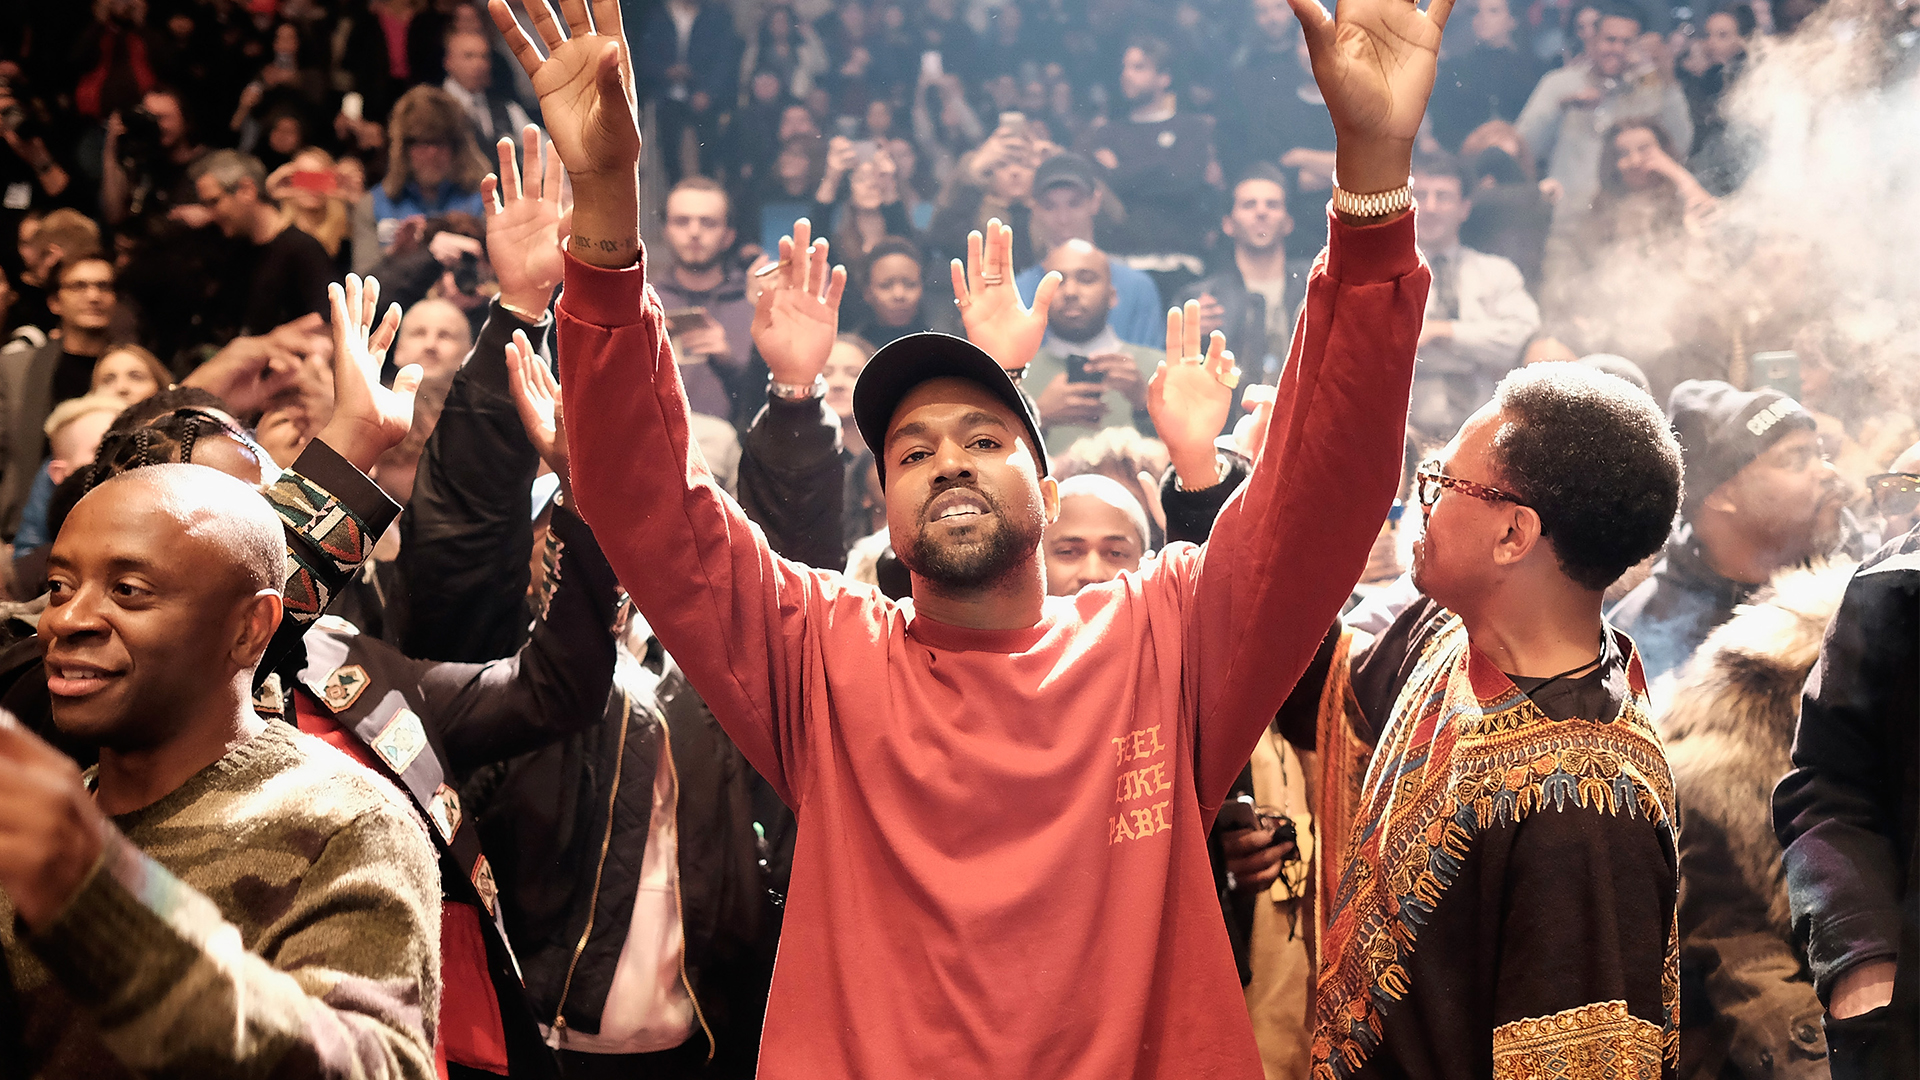 'Welcome To Graduation' — Kanye West's Evolution To Be Taught As An Online College Course At This University